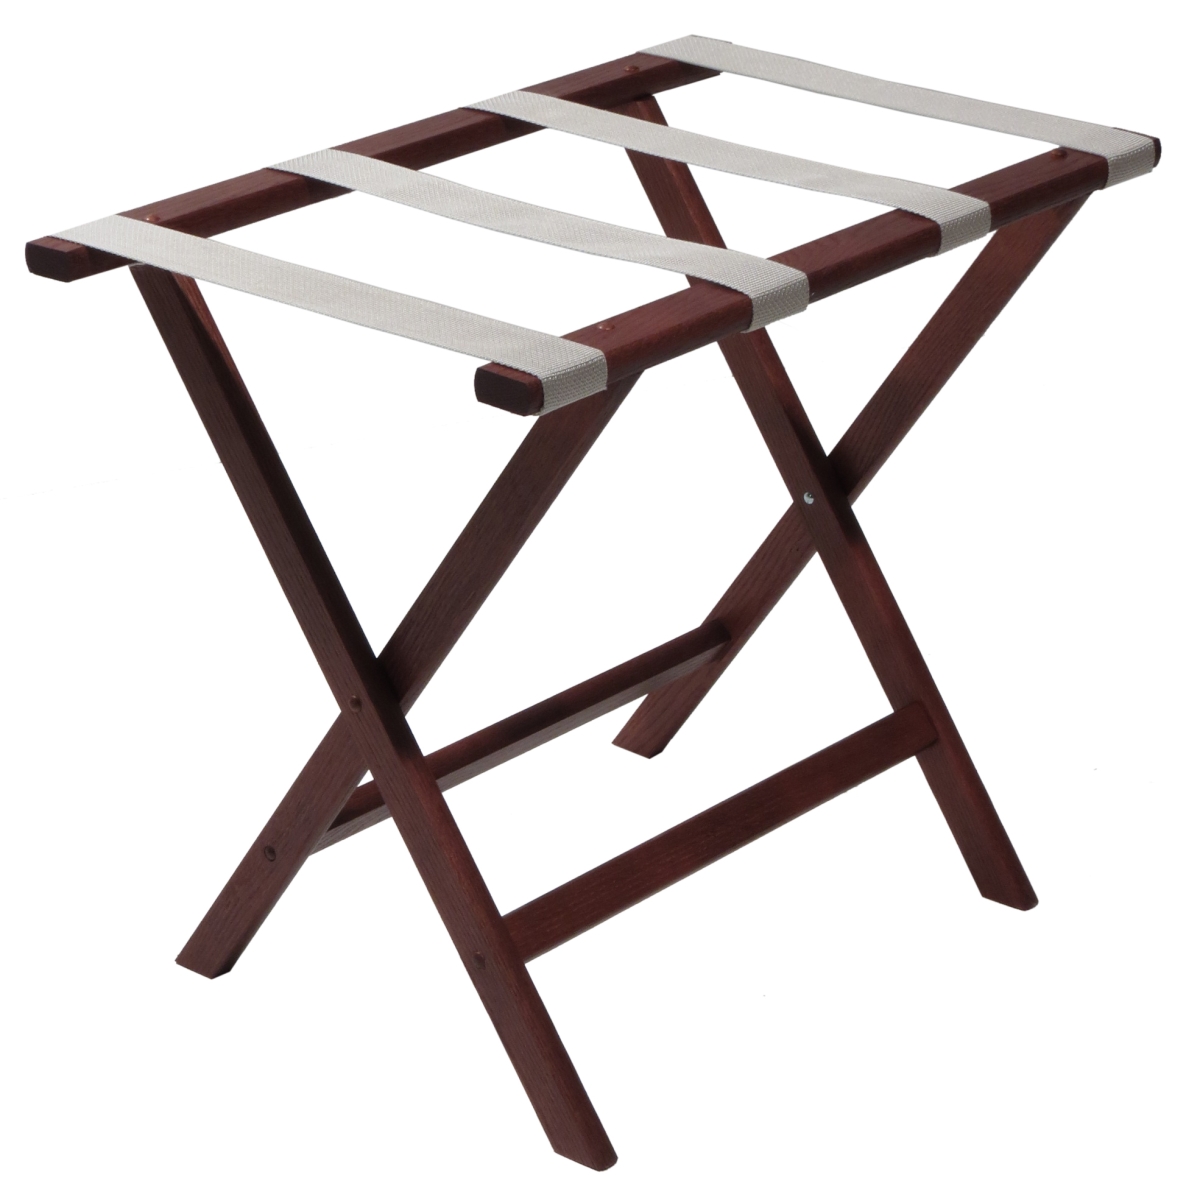 Wooden Mallet LR-MHSVR Deluxe Straight Leg Luggage Rack with Silver Straps - Mahogany